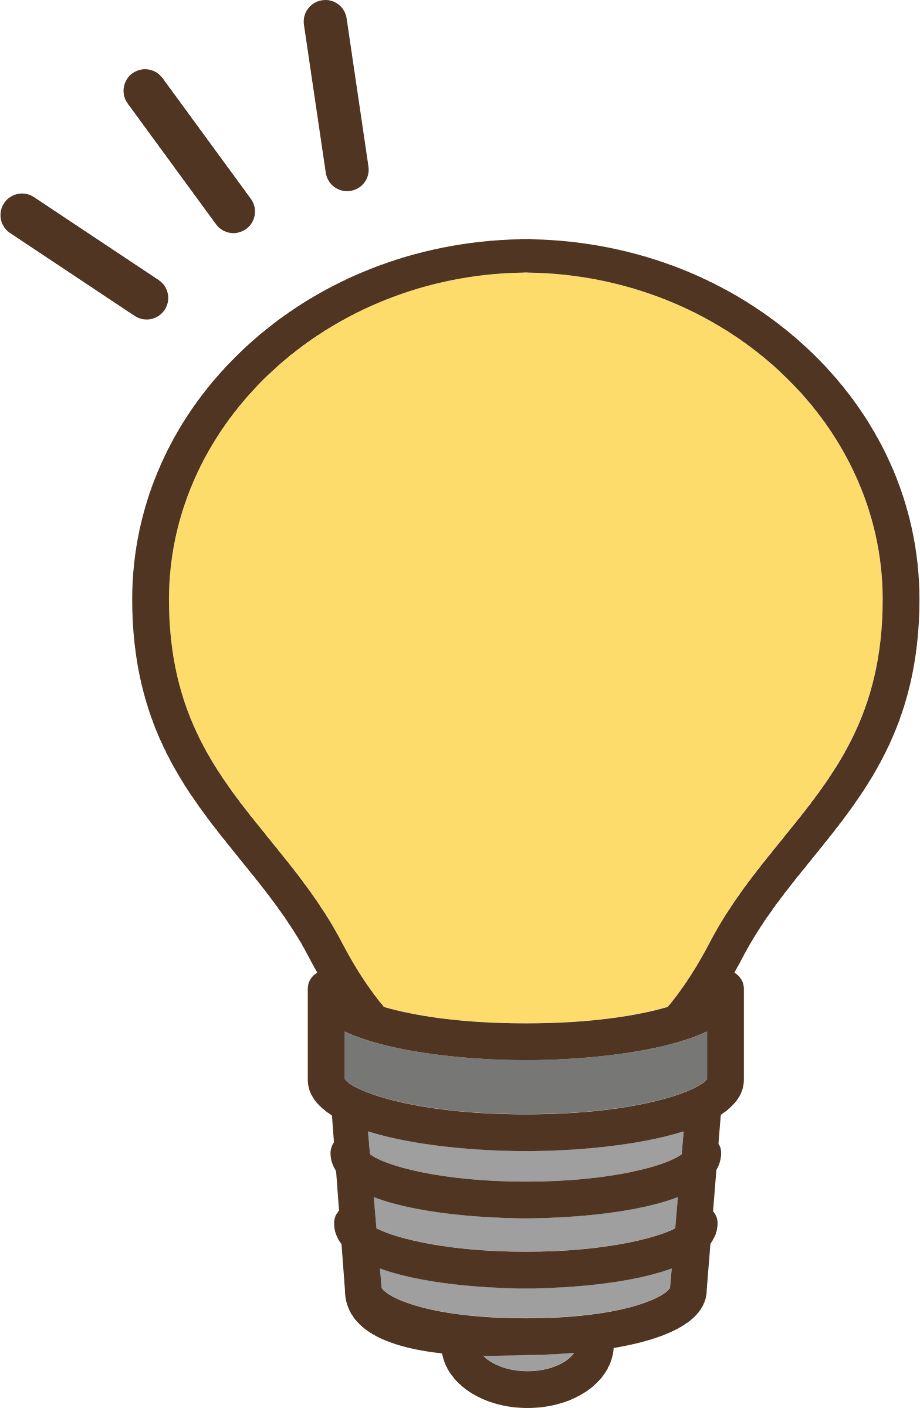 Download High Quality light bulb clipart yellow Transparent PNG Images